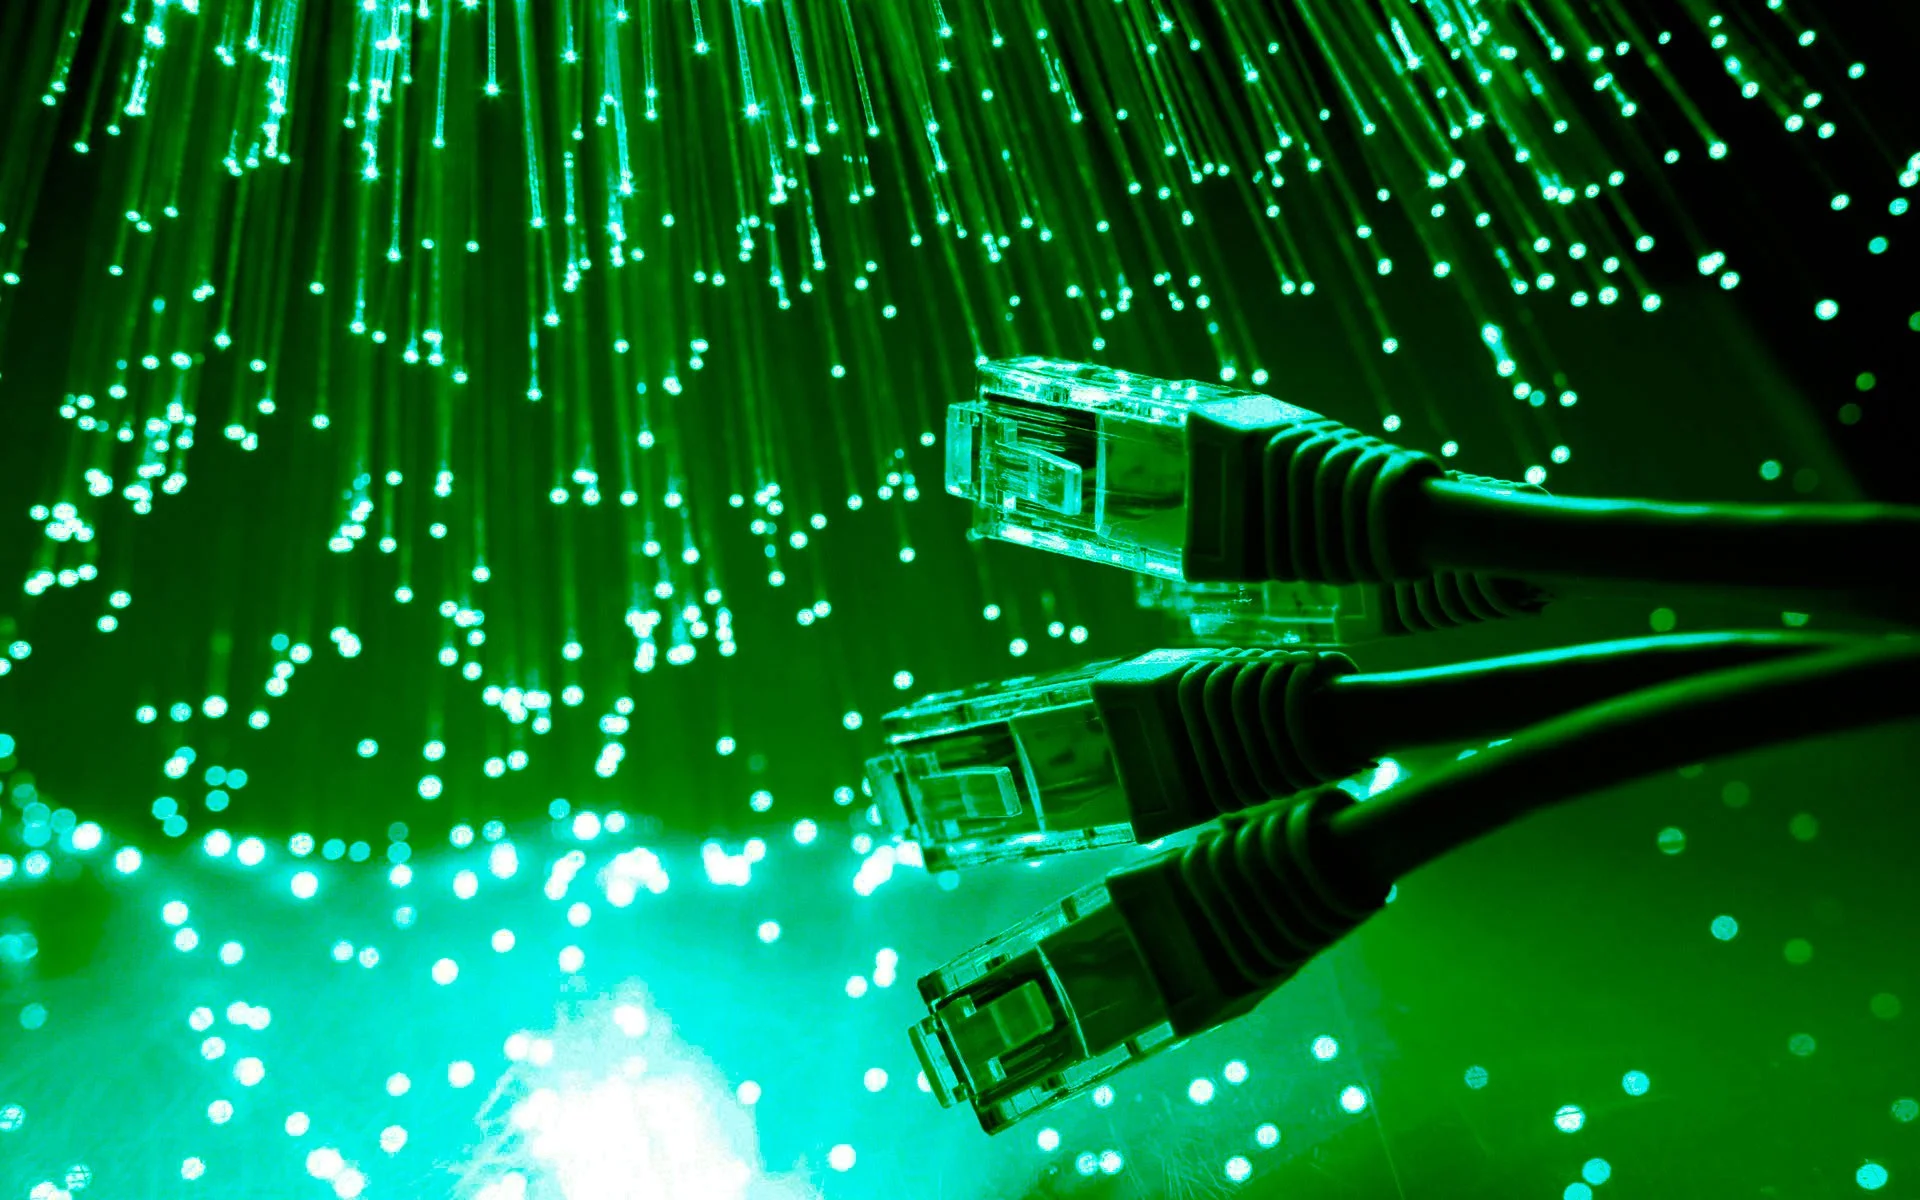 Japan's fiber optic network reaches 1,000,000 Gbps data rate